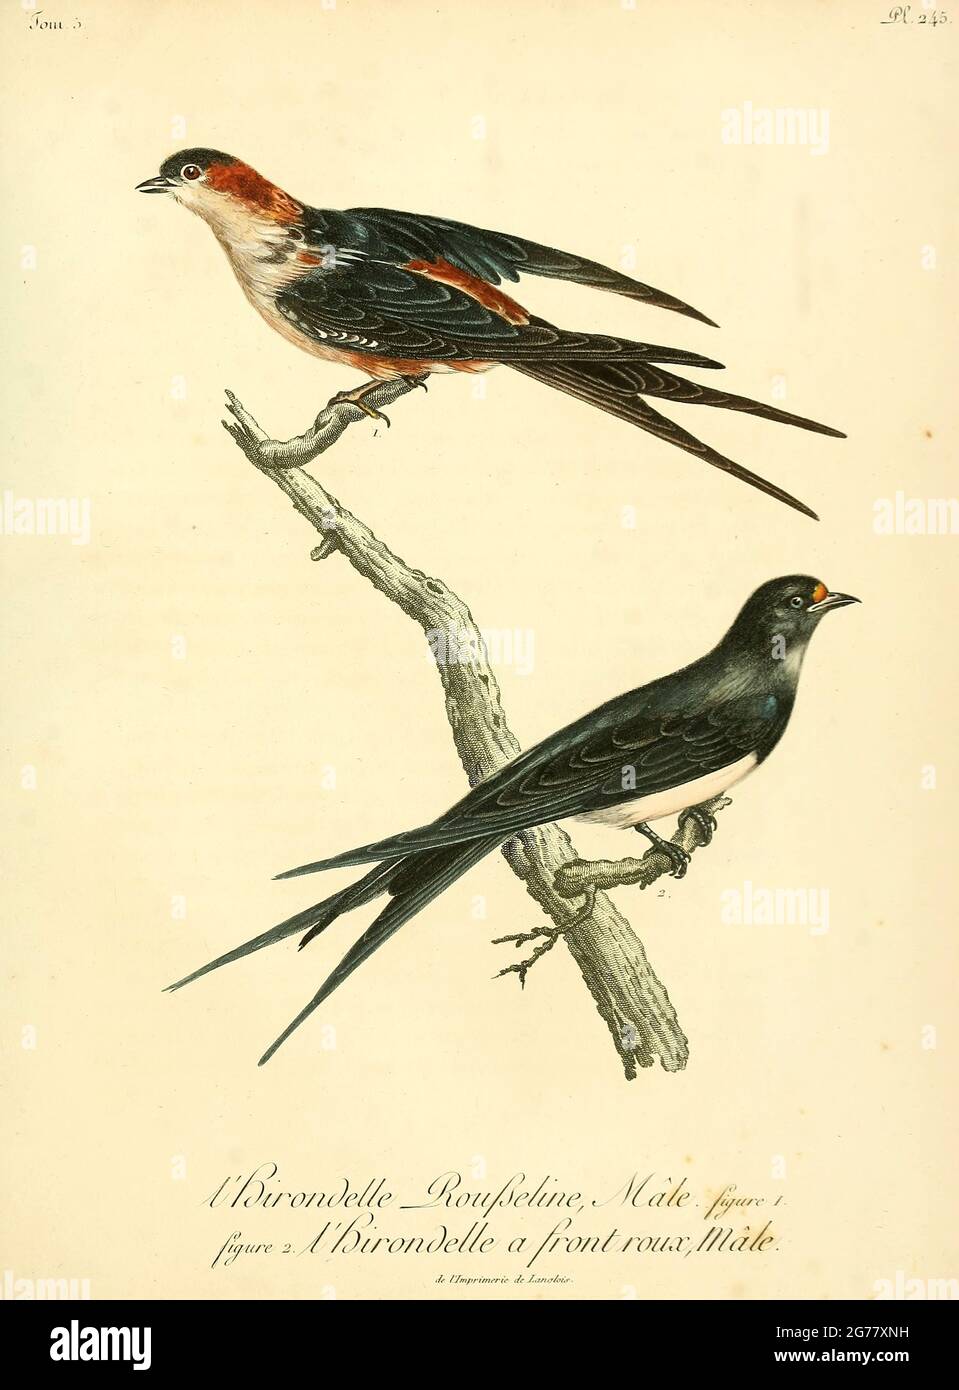 Hirondelle rousseline Cecropis daurica - Red-rumped Swallow and  Hirondelle à ventre roux Cecropis semirufa - Red-breasted Swallow from the Book Histoire naturelle des oiseaux d'Afrique [Natural History of birds of Africa] Volume 5, by Le Vaillant, Francois, 1753-1824; Publish in Paris by Chez J.J. Fuchs, libraire 1799 Stock Photo